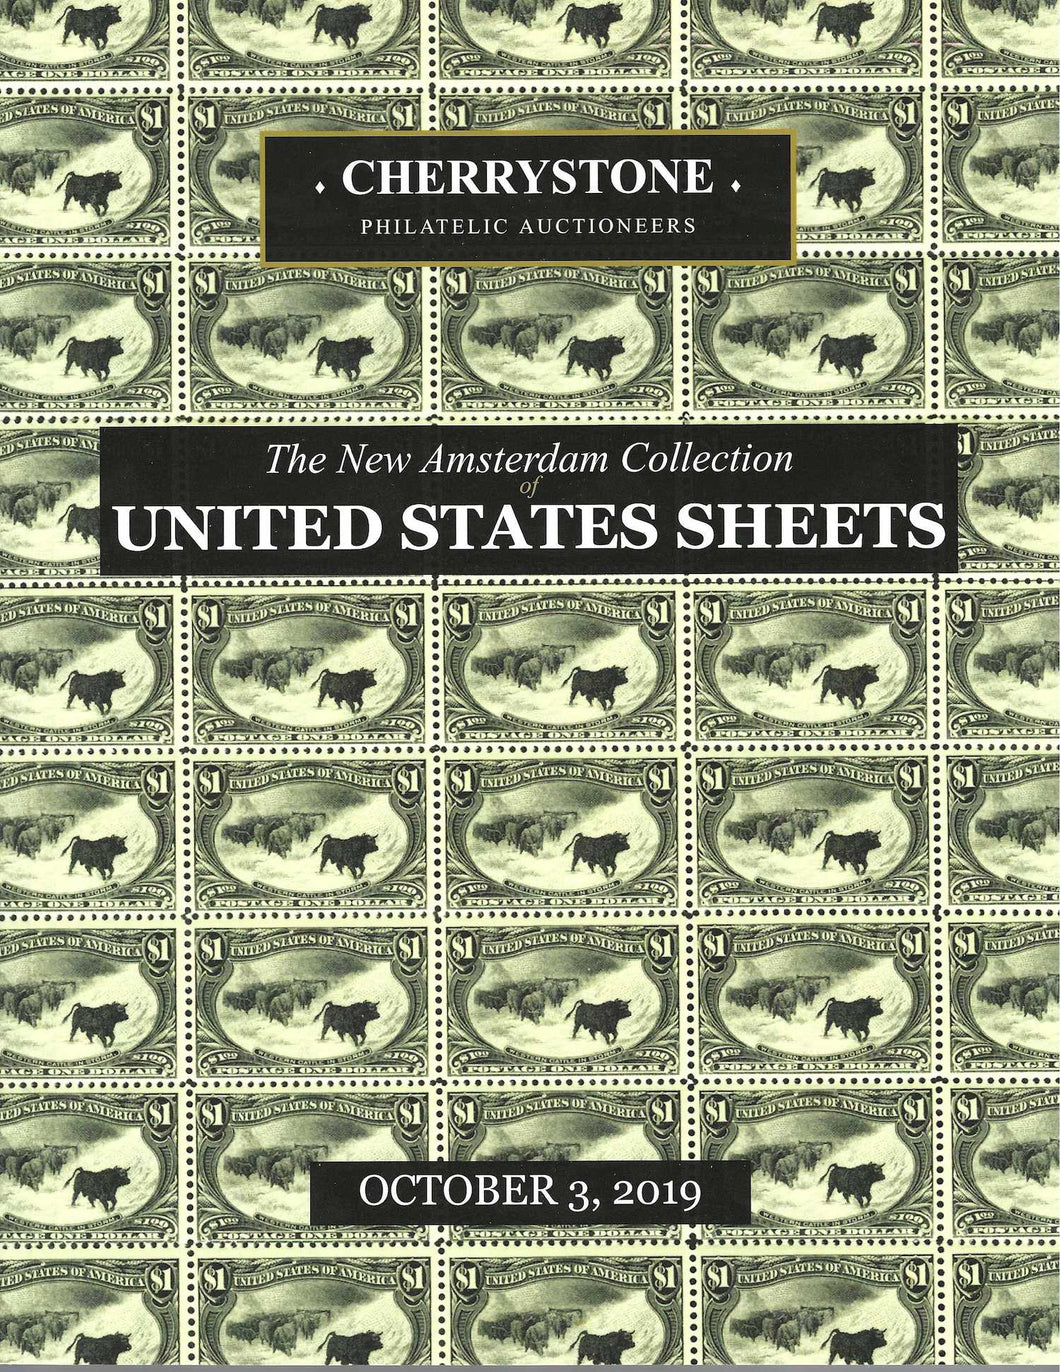 New Amsterdam Collection of United States Sheets, Cherrystone Philatelic Auctioneers, October 3, 2019